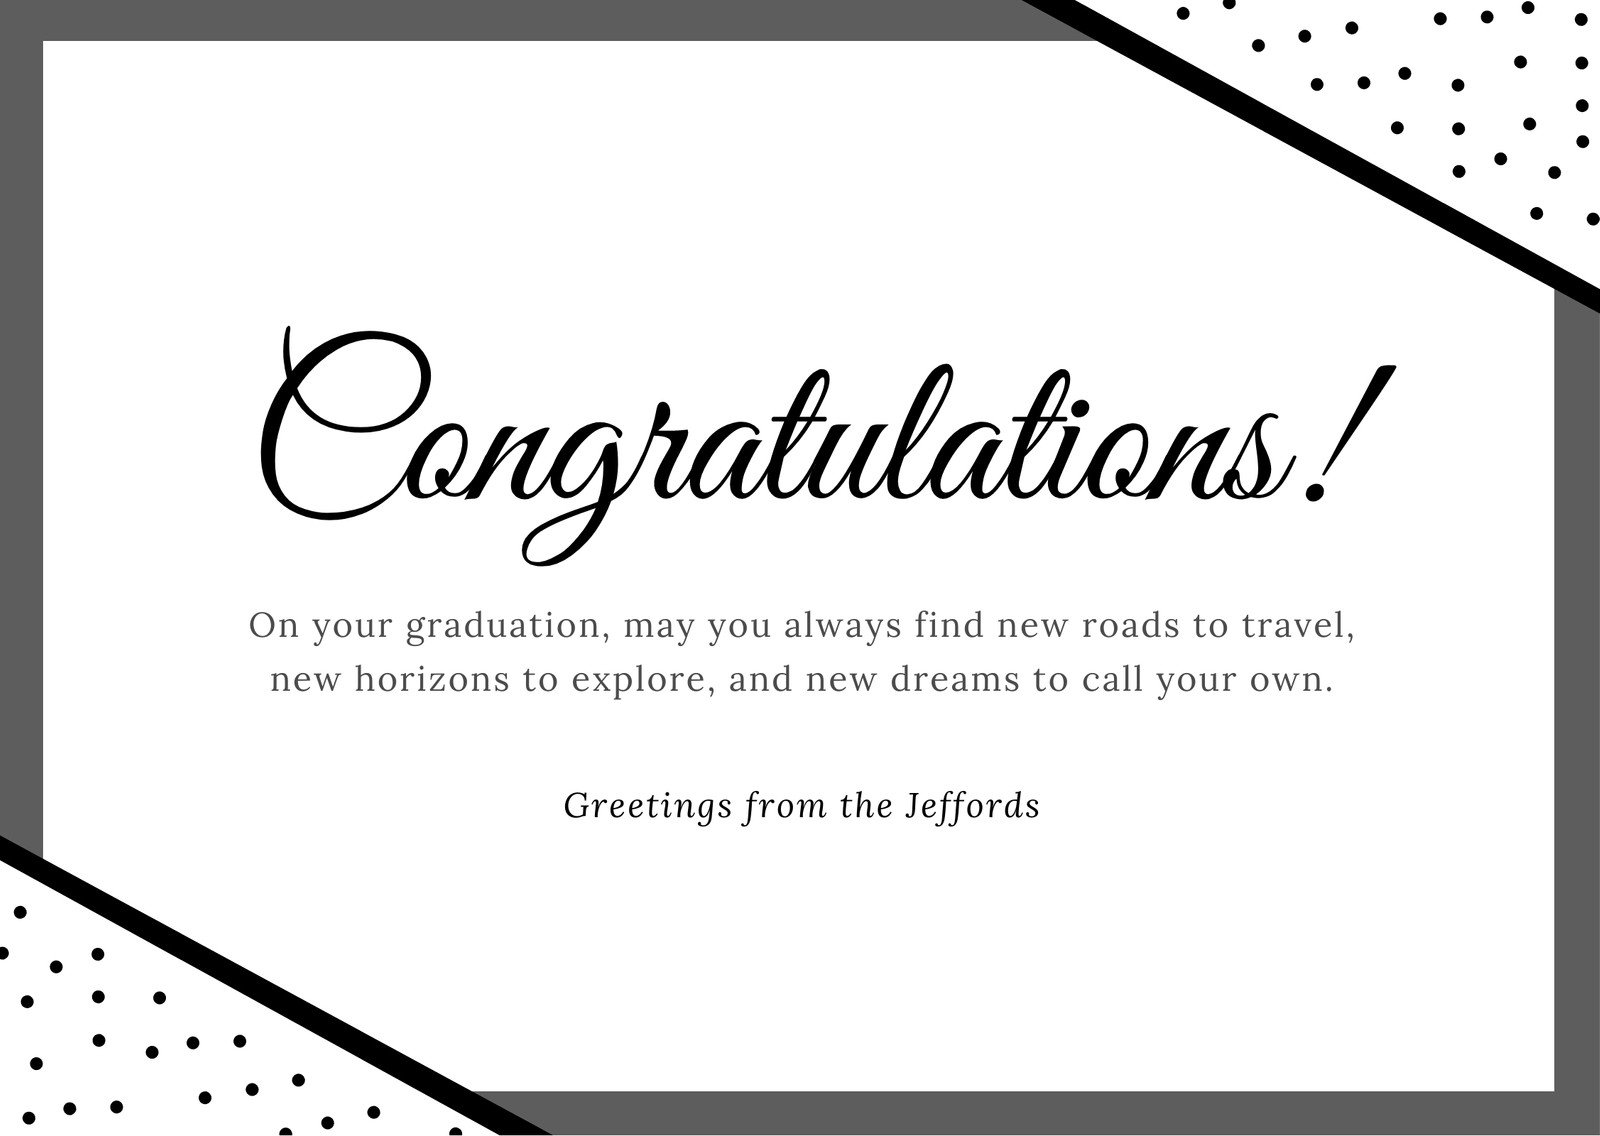 greetings-card-congratulations-cards-invitations-for-celebrations-occasions-home-garden